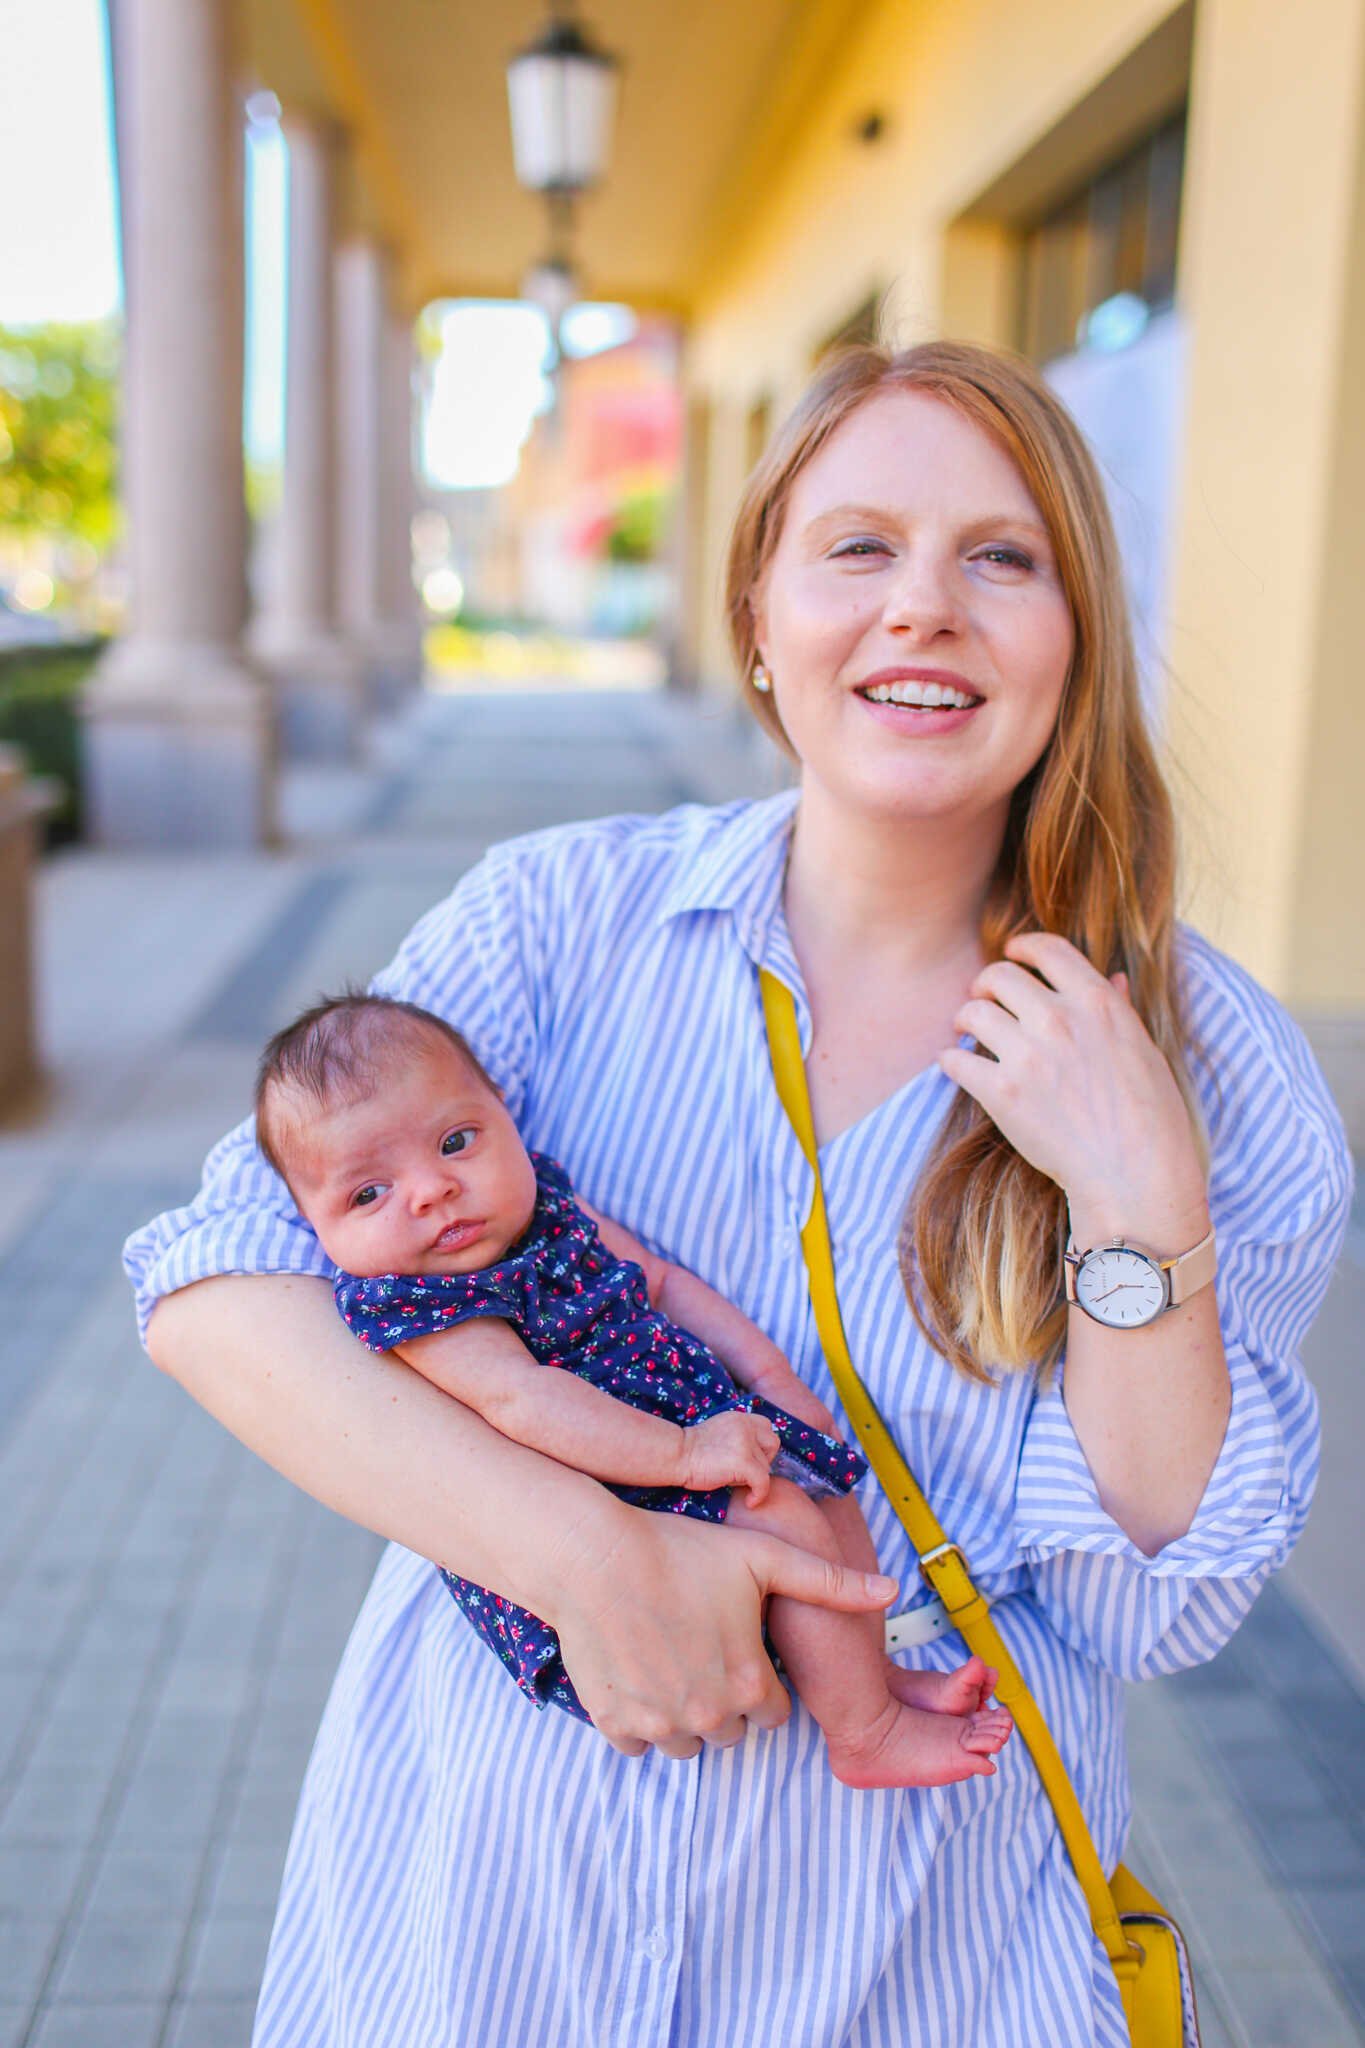 Family Travel Guide to Folsom California - Shopping with baby Scout at The Palladio Shopping Mall in Folsom.